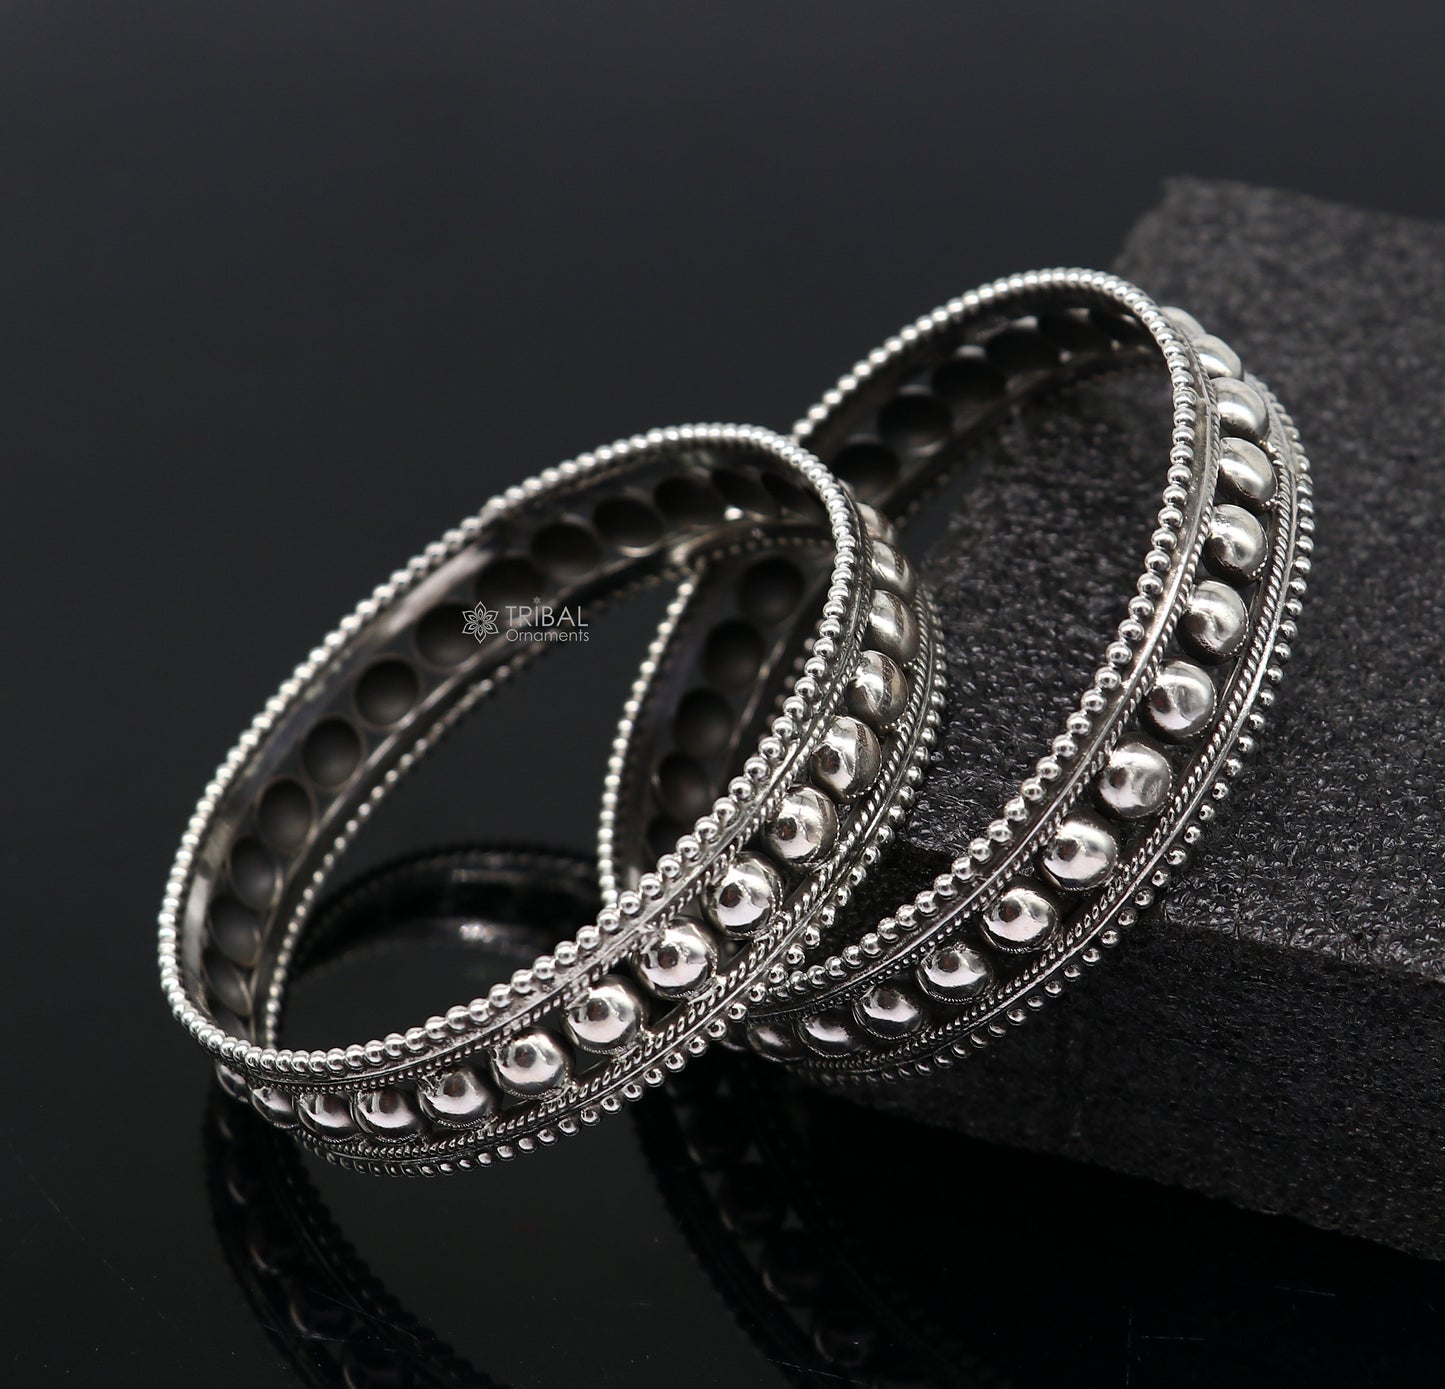 Trendy cultural design 925 sterling silver unique style handmade bangle bracelet , best brides collection wedding jewelry from india nba400 - TRIBAL ORNAMENTS